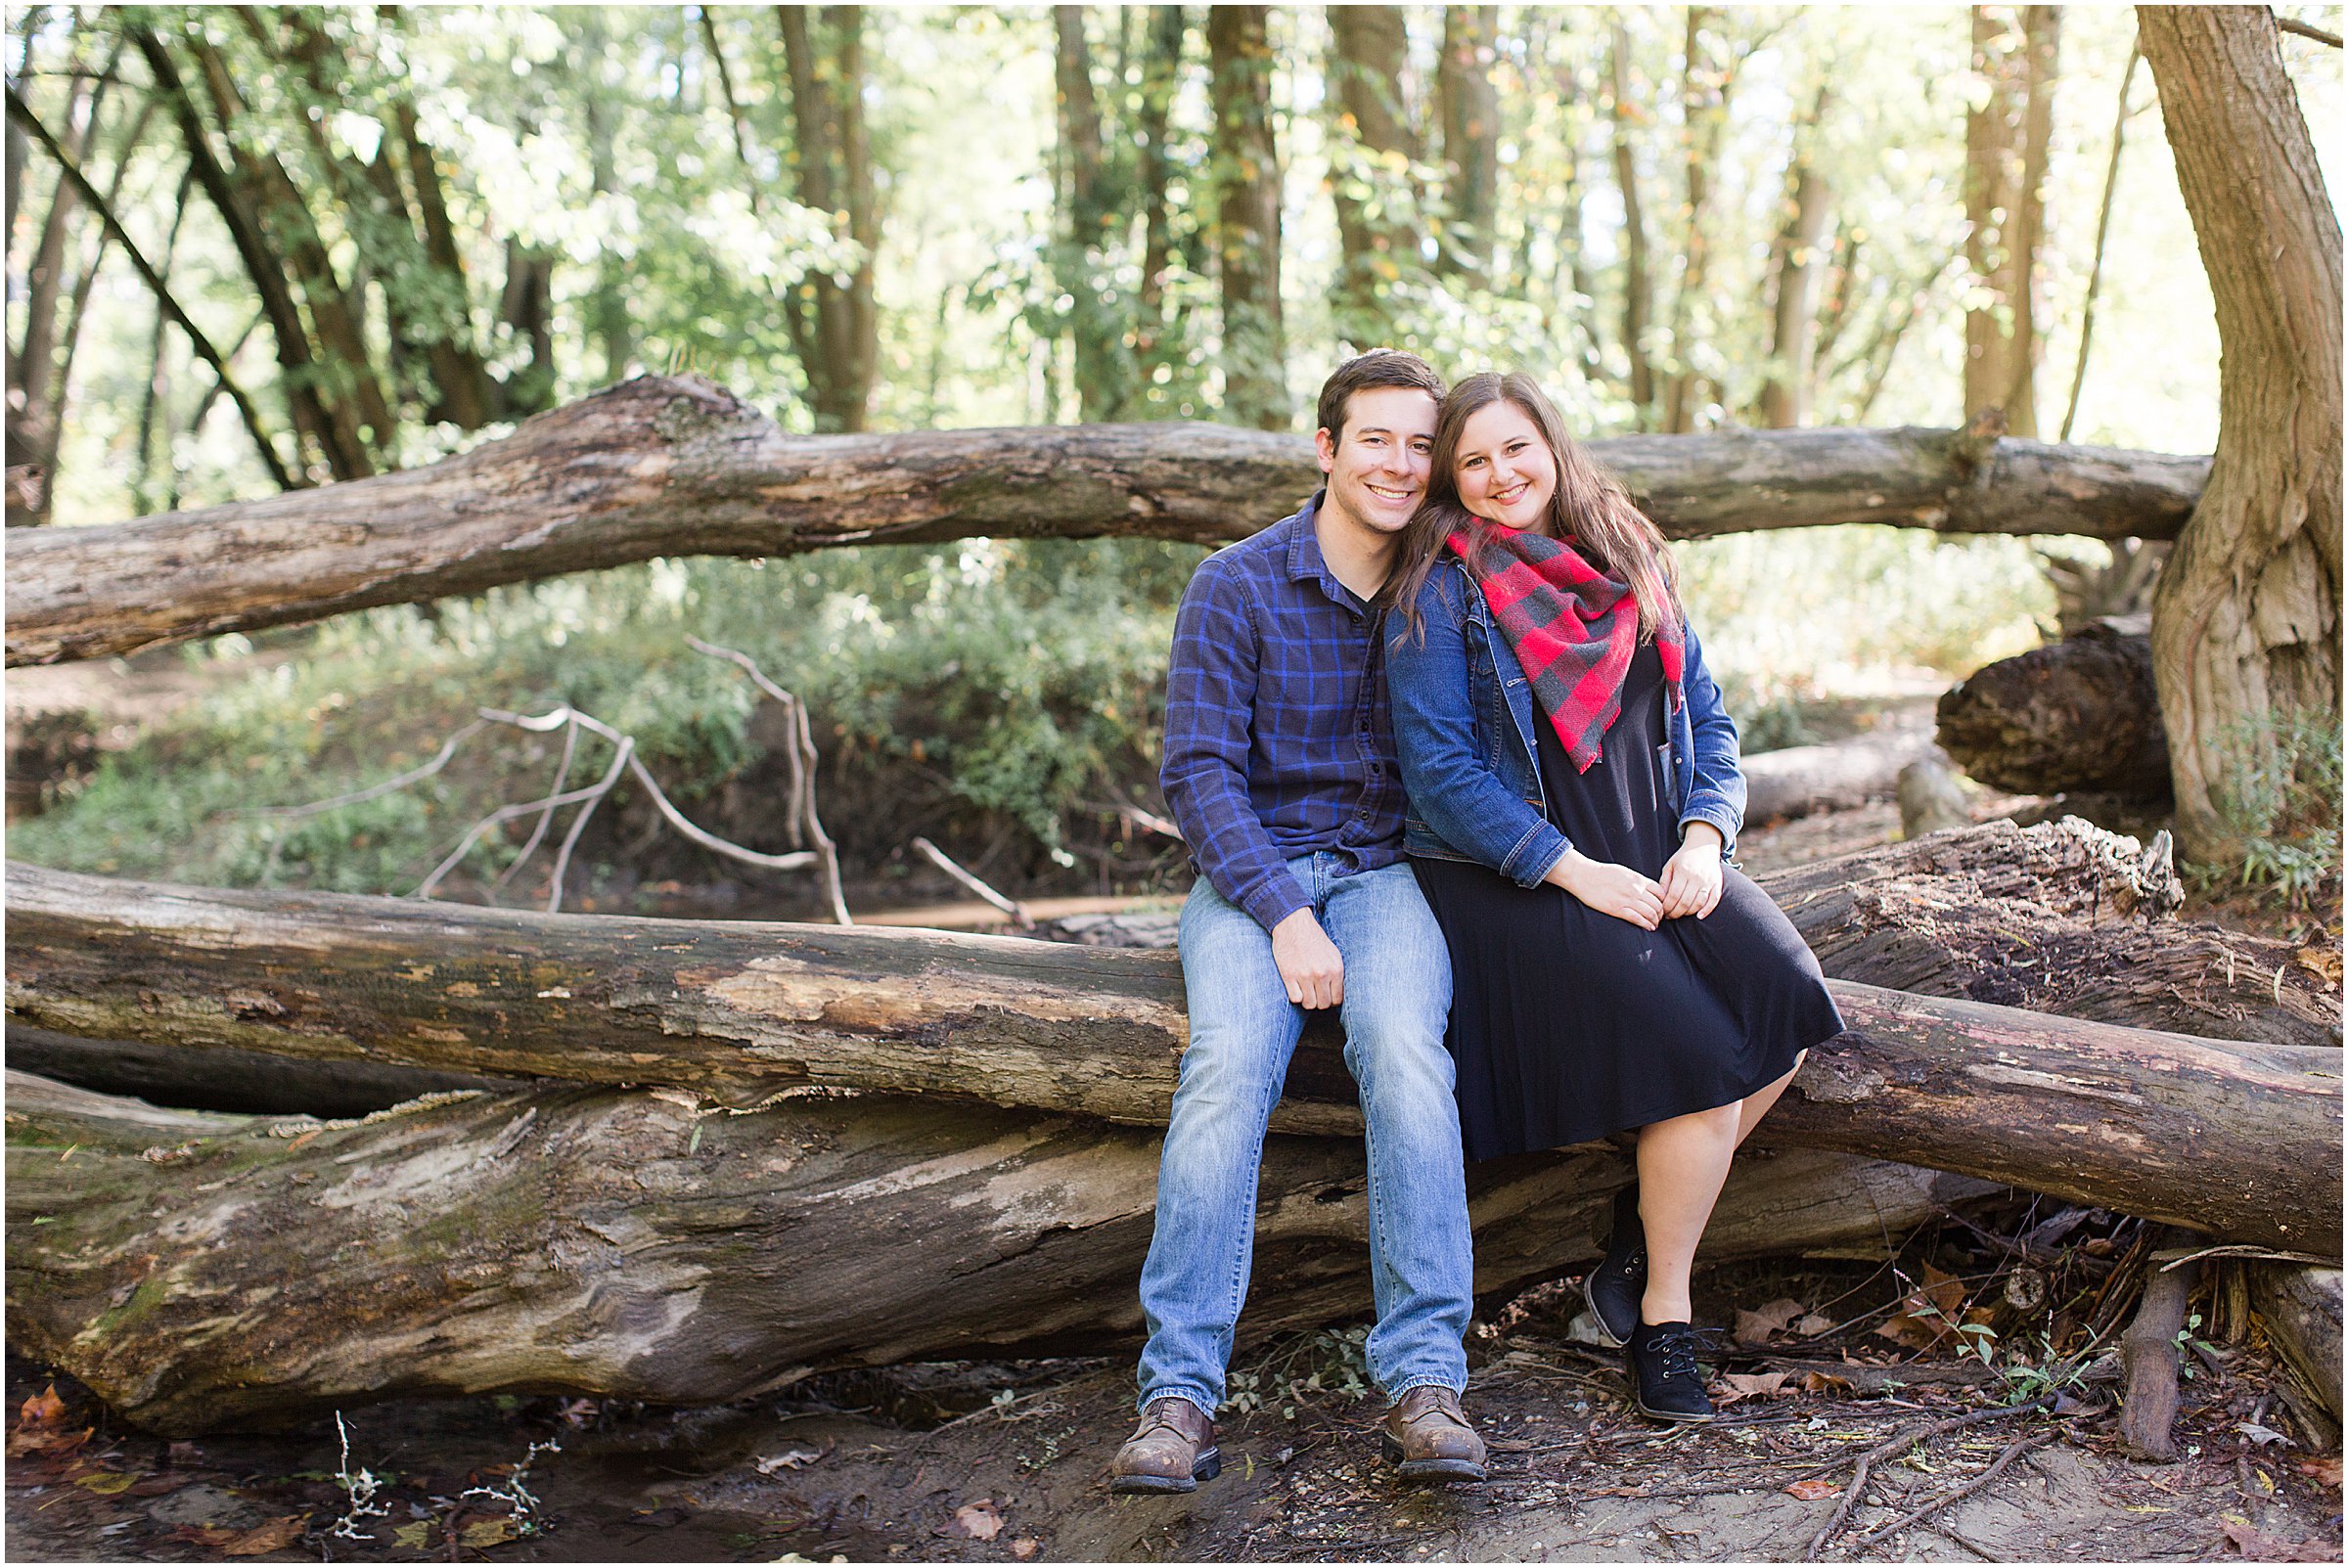 Holliday Park Engagement Session by Sami Renee_0014.jpg